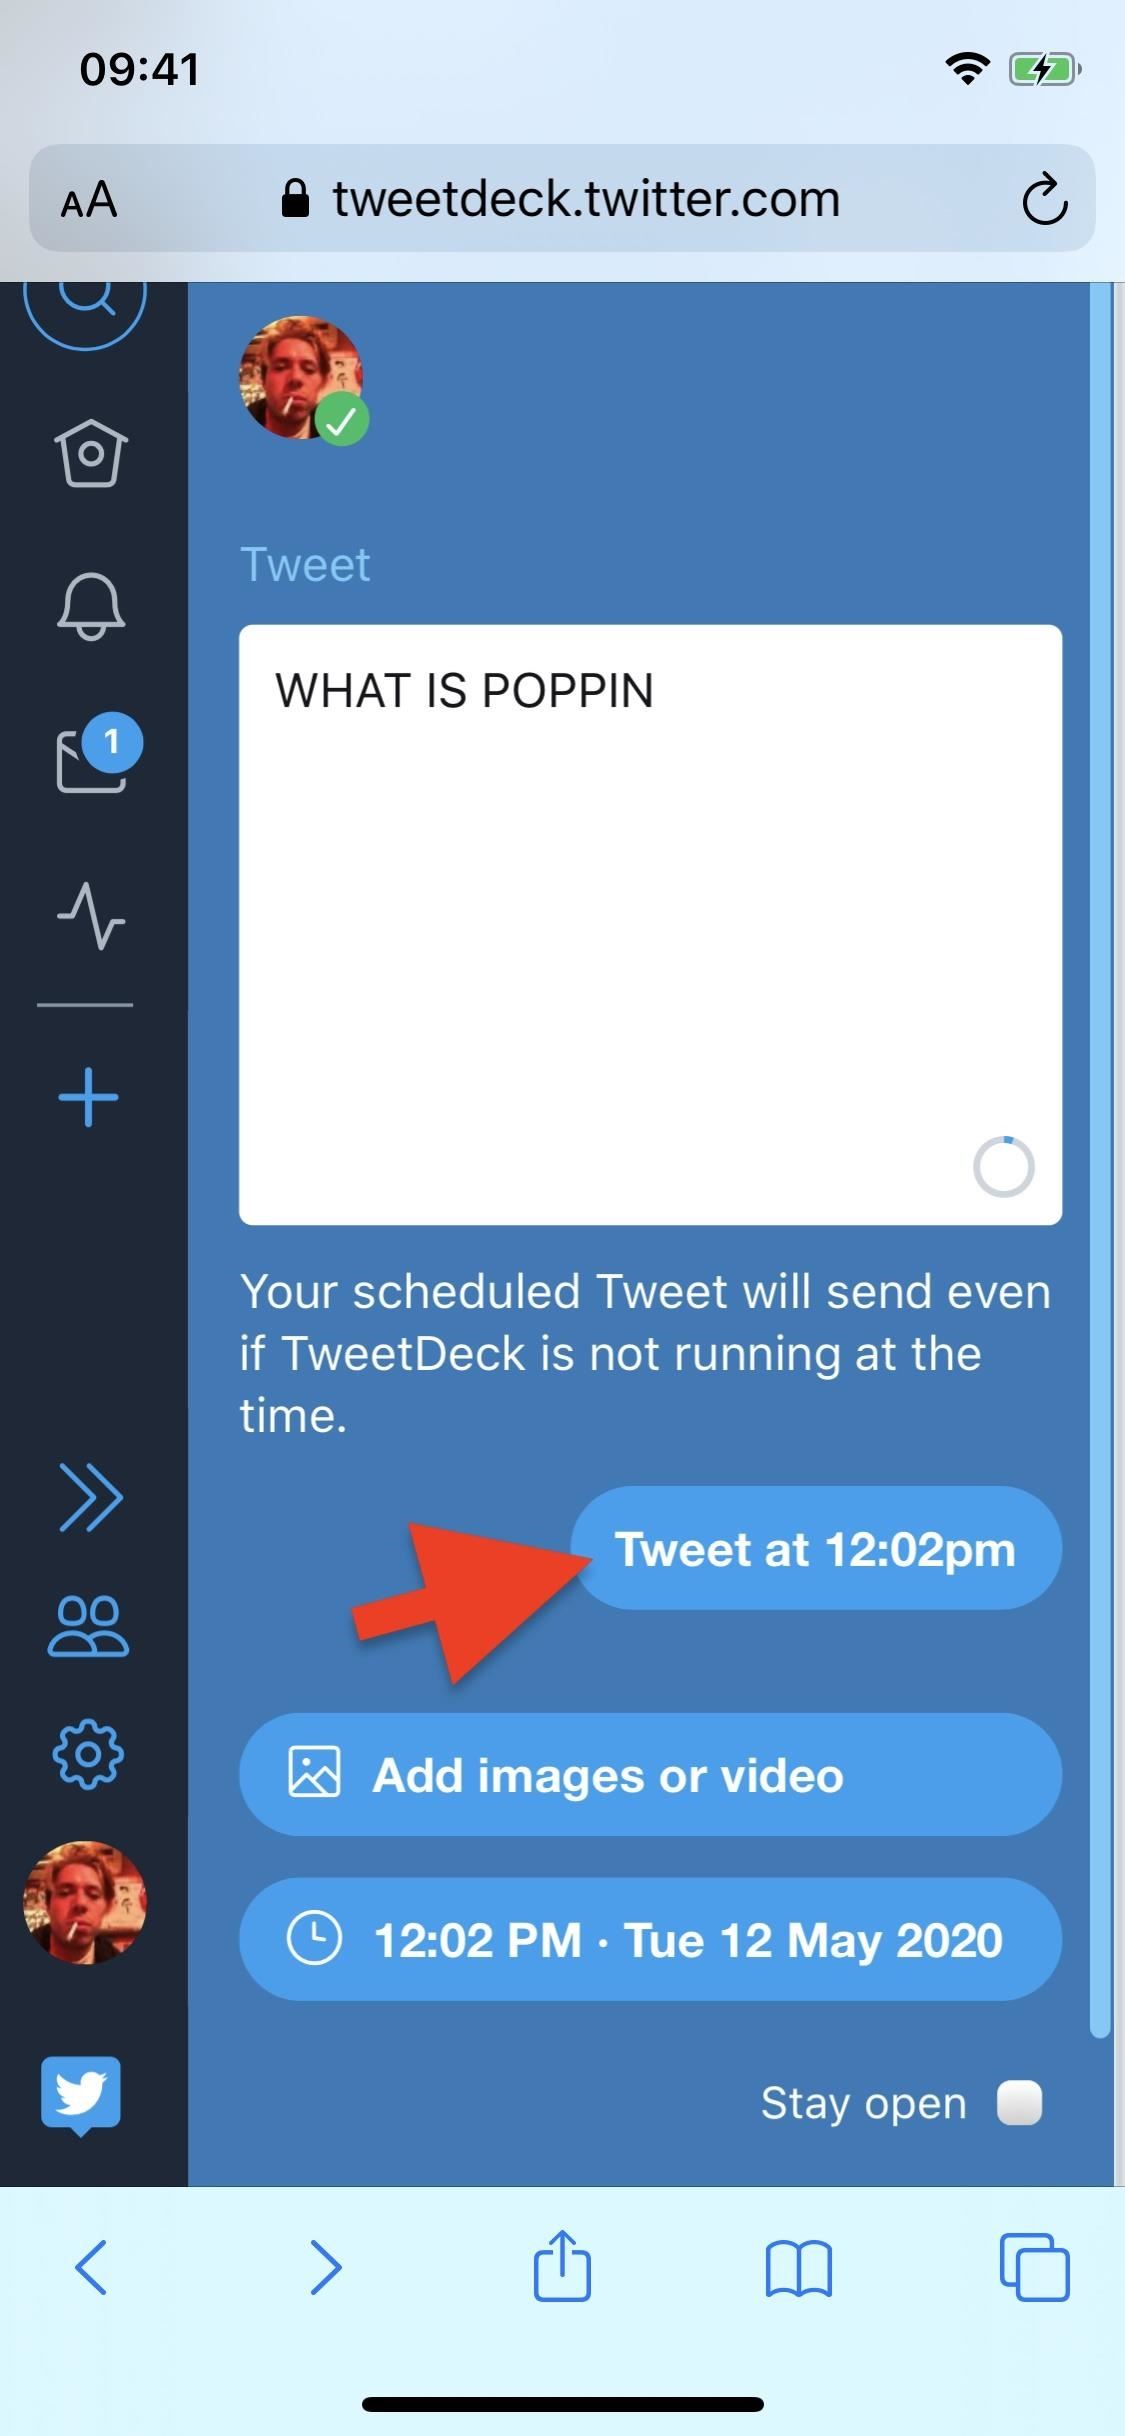 How to Schedule a Tweet on Twitter from Your iPhone or Android Phone